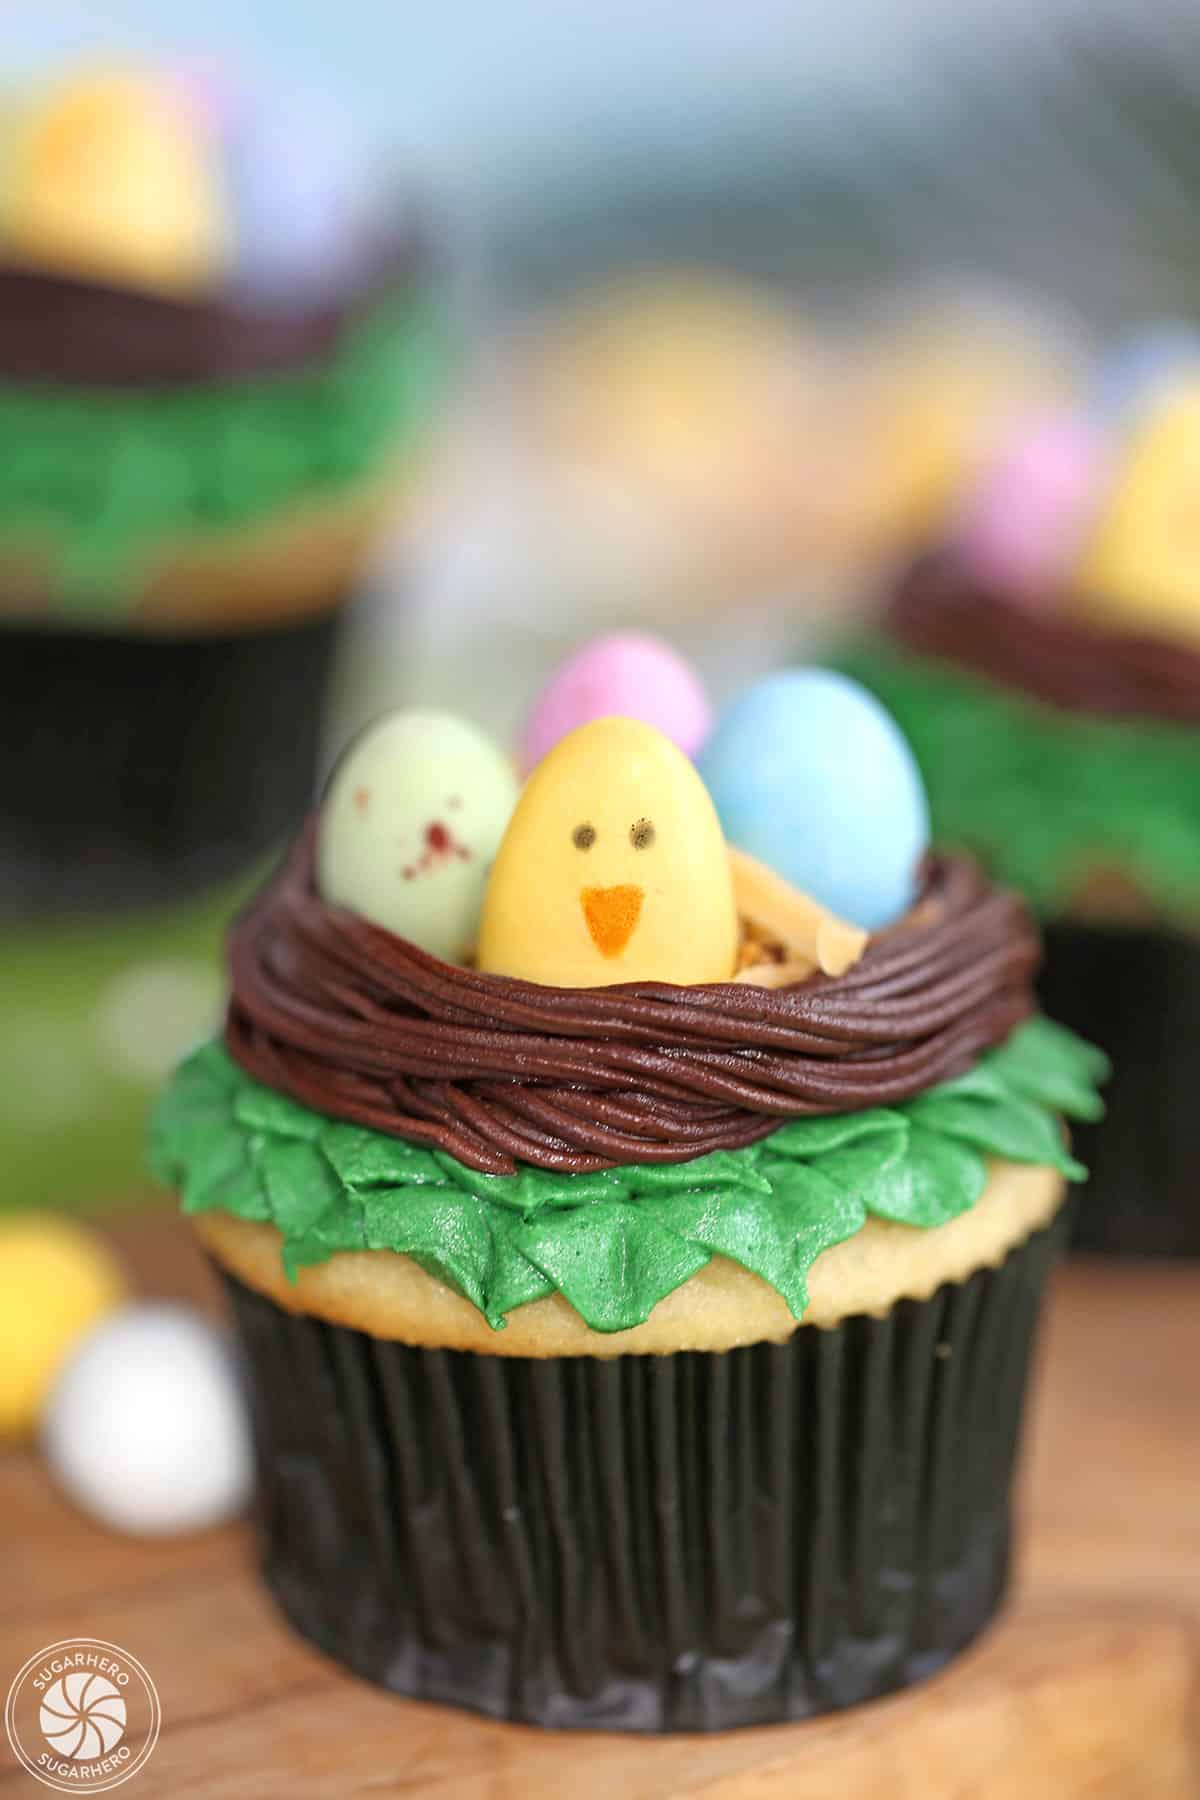 Easter Bird's Nest Cupcakes filled with candy eggs, on a wooden surface.